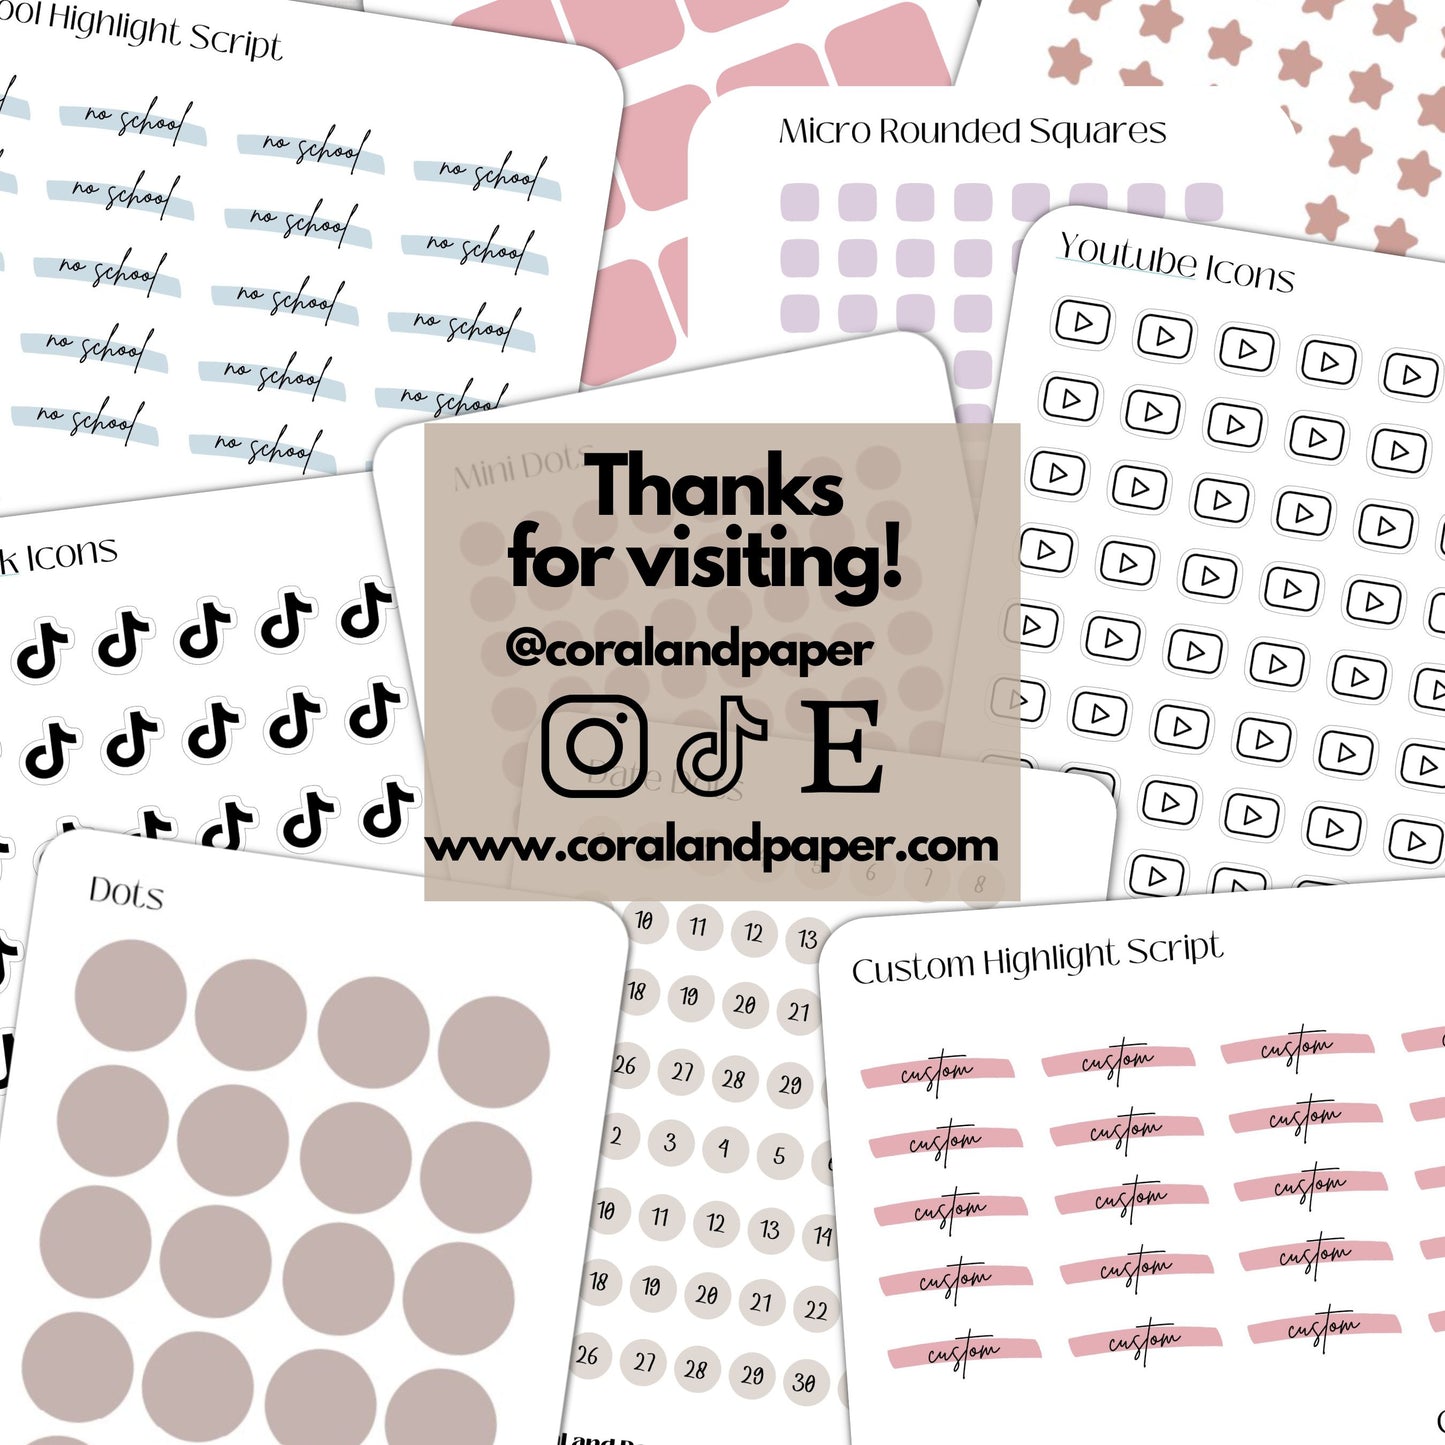 EASTER EGG HUNT - Planner Stickers | Functional Stickers | Minimalist Planning